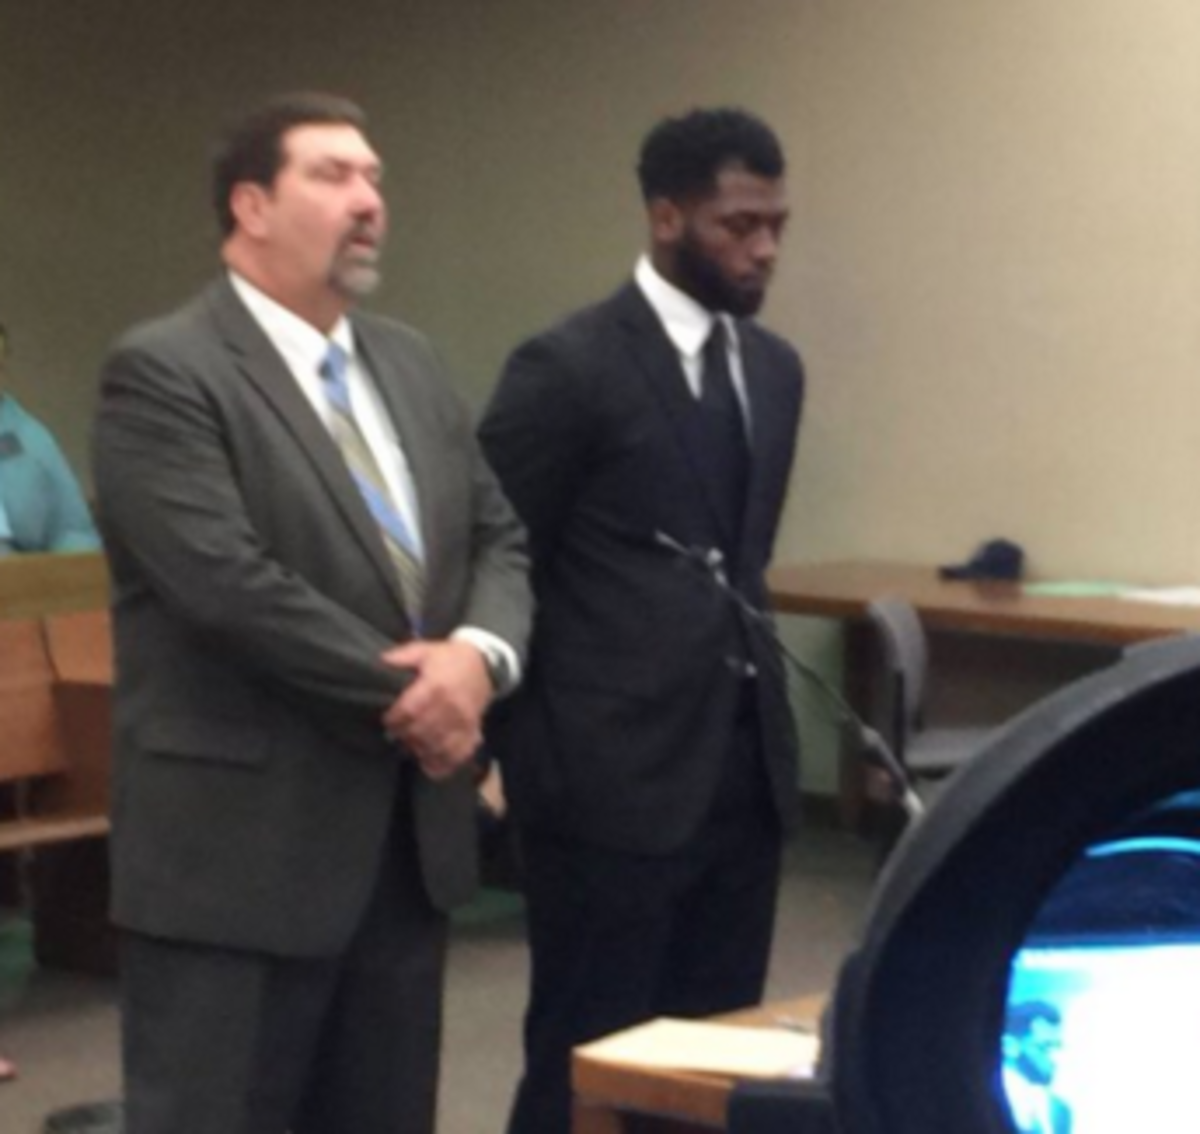 JT Barrett stands with a man in court.